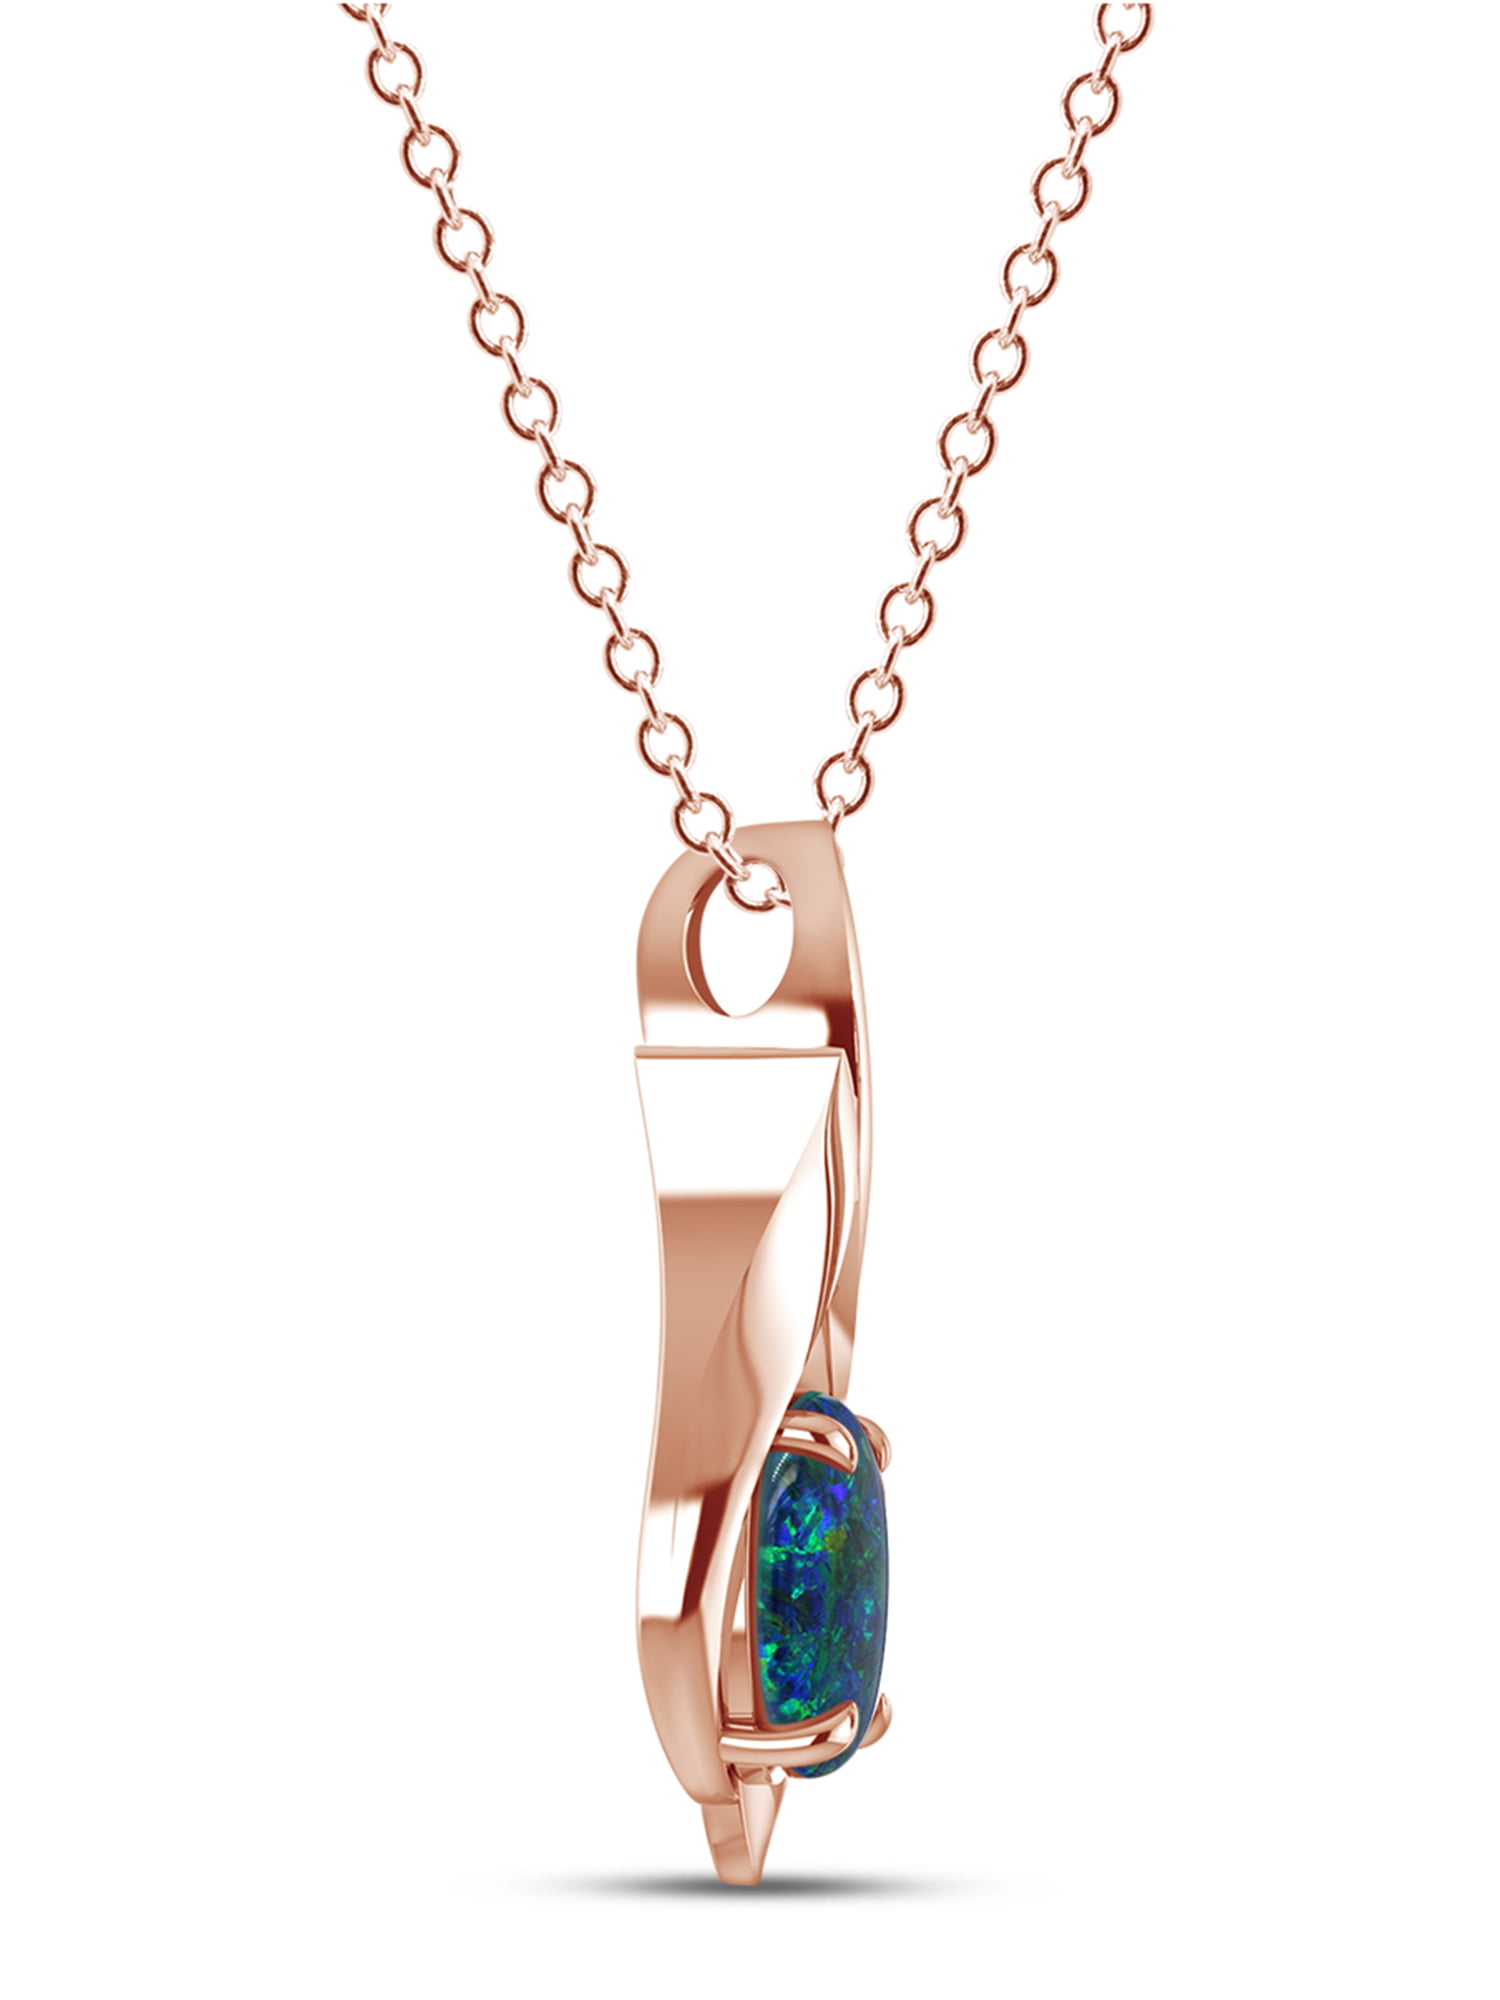 GEMVIO Collection 1 3/4 CTTW 10X8MM Oval Cut Australian Natural Triplet  Opal Gemstone Solitaire Pendant Necklace in 10K Solid Rose Gold Women  Jewelry 